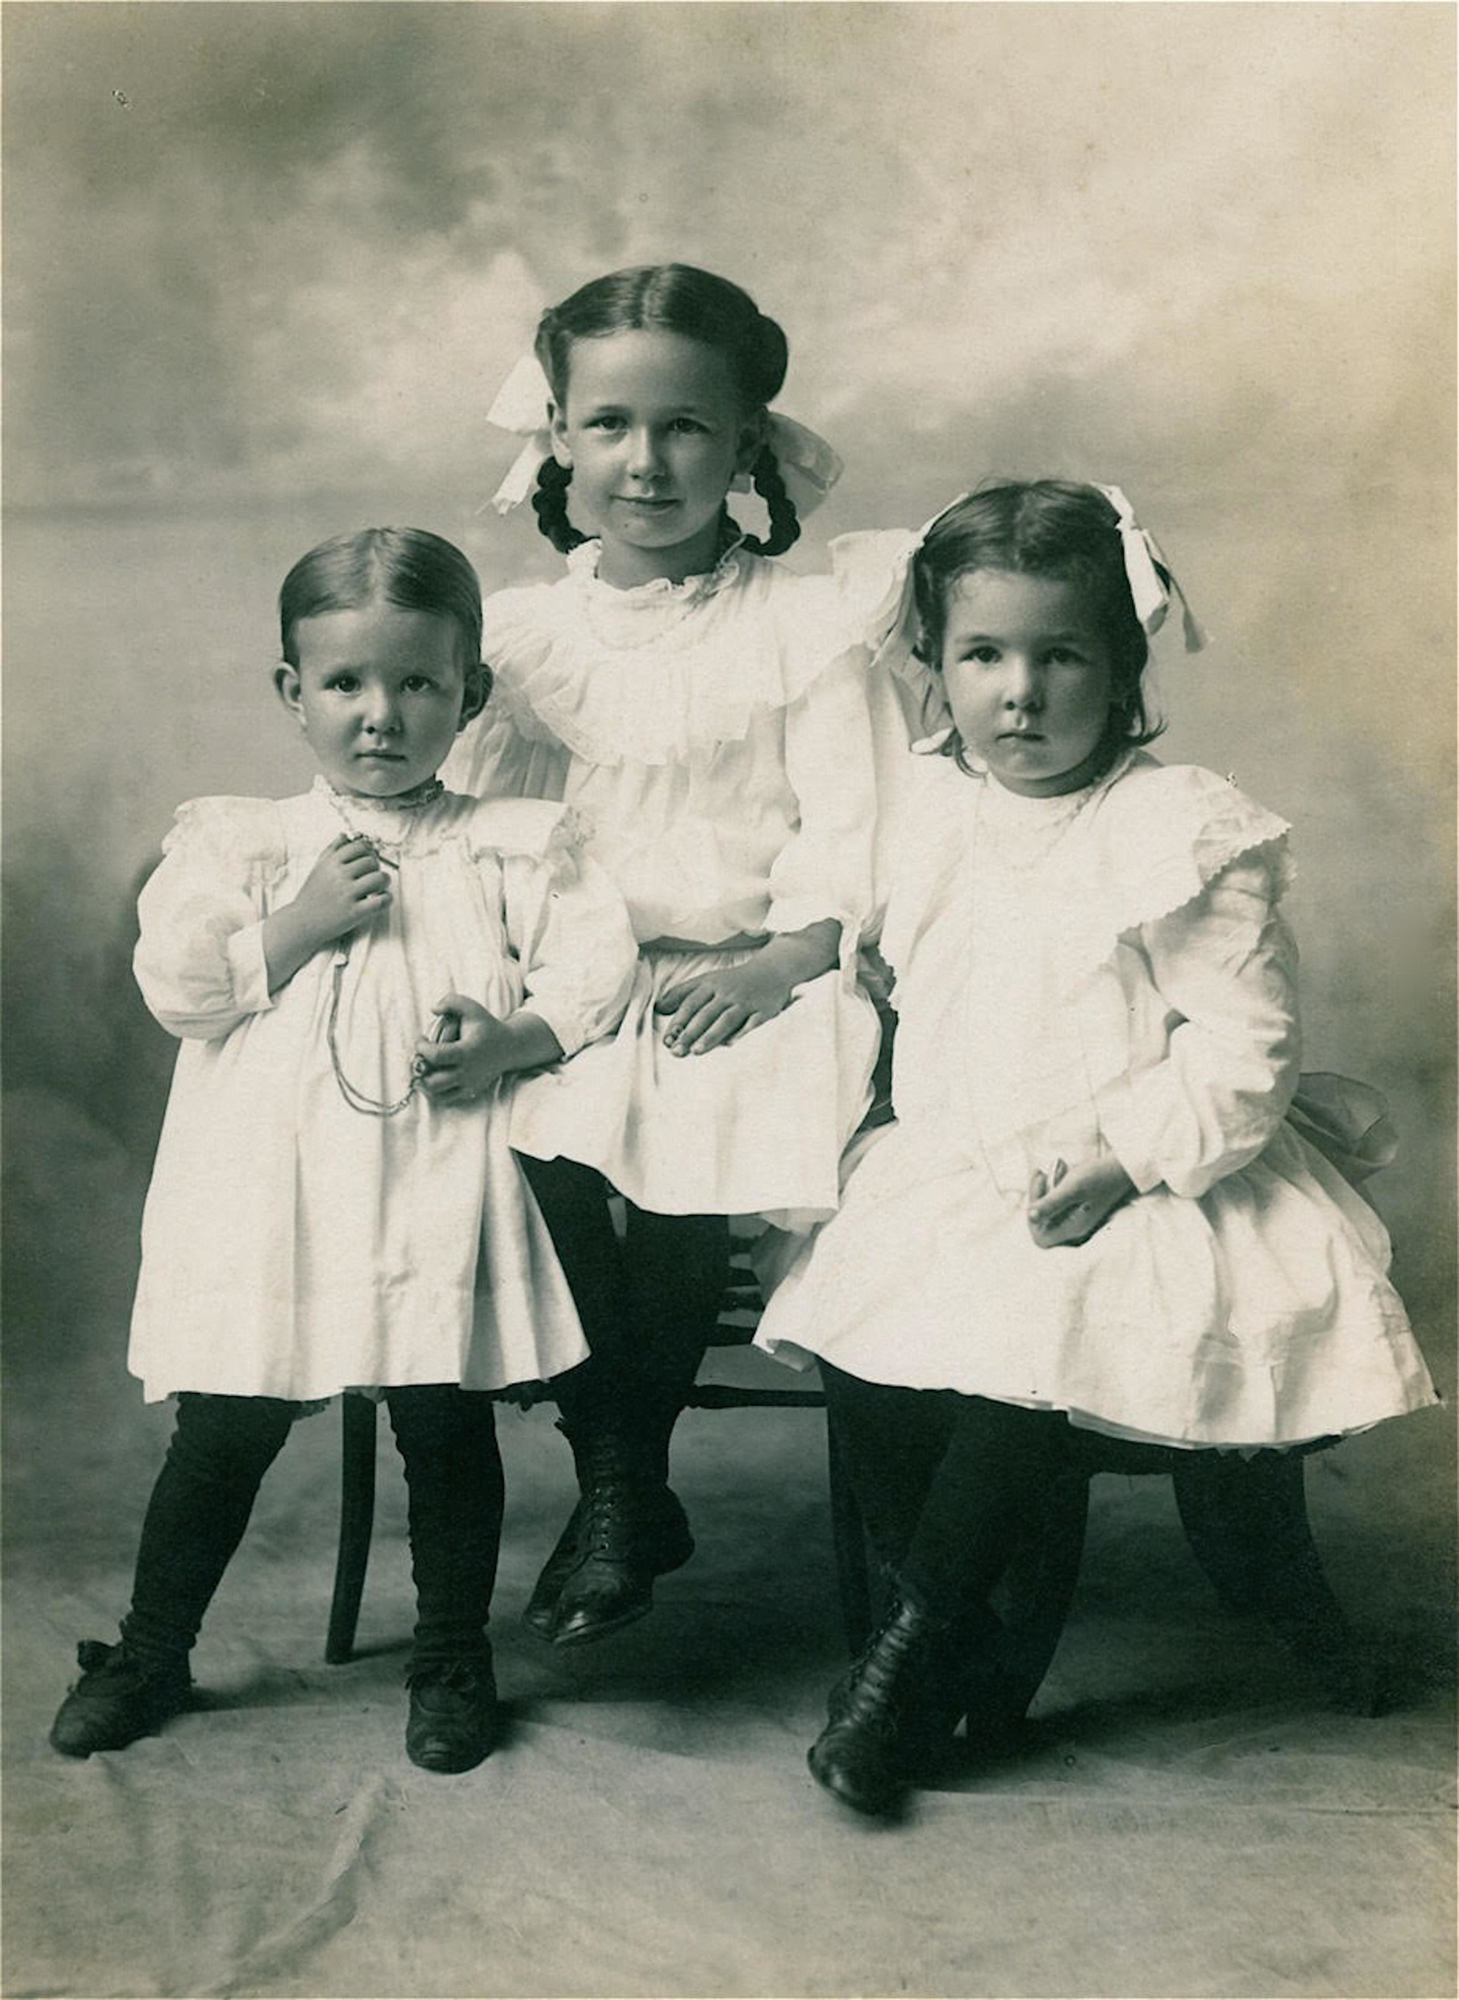 Henry A. Wilkening had three daughters, Gertrude, left, Esther and Rose.